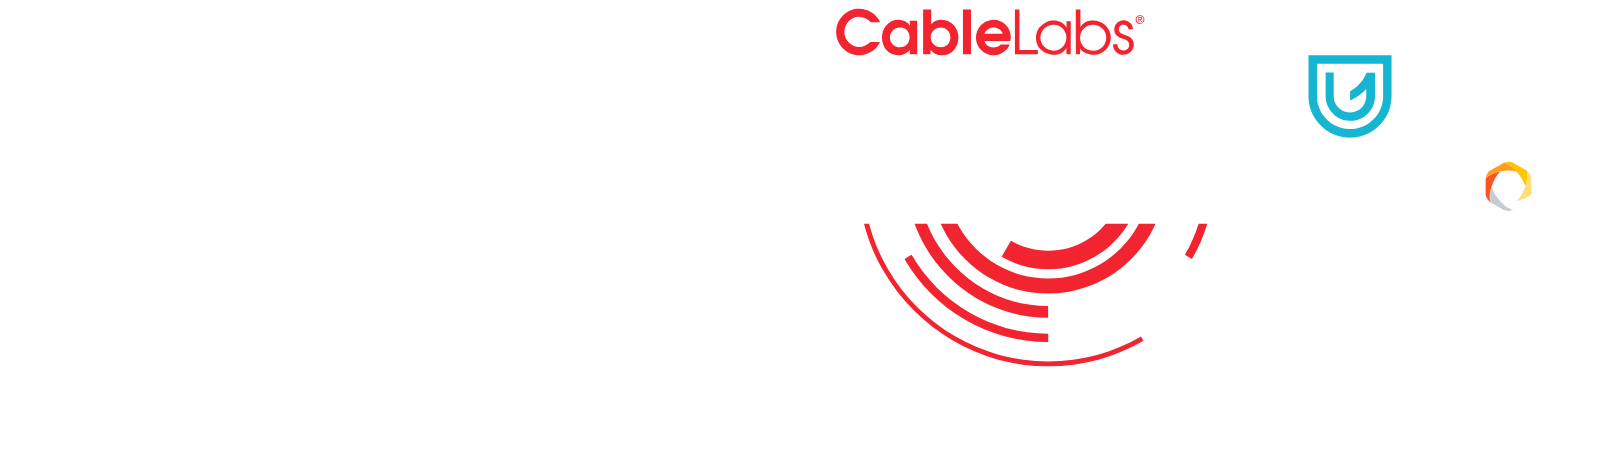 Summer Conference 2018 Project Meetings